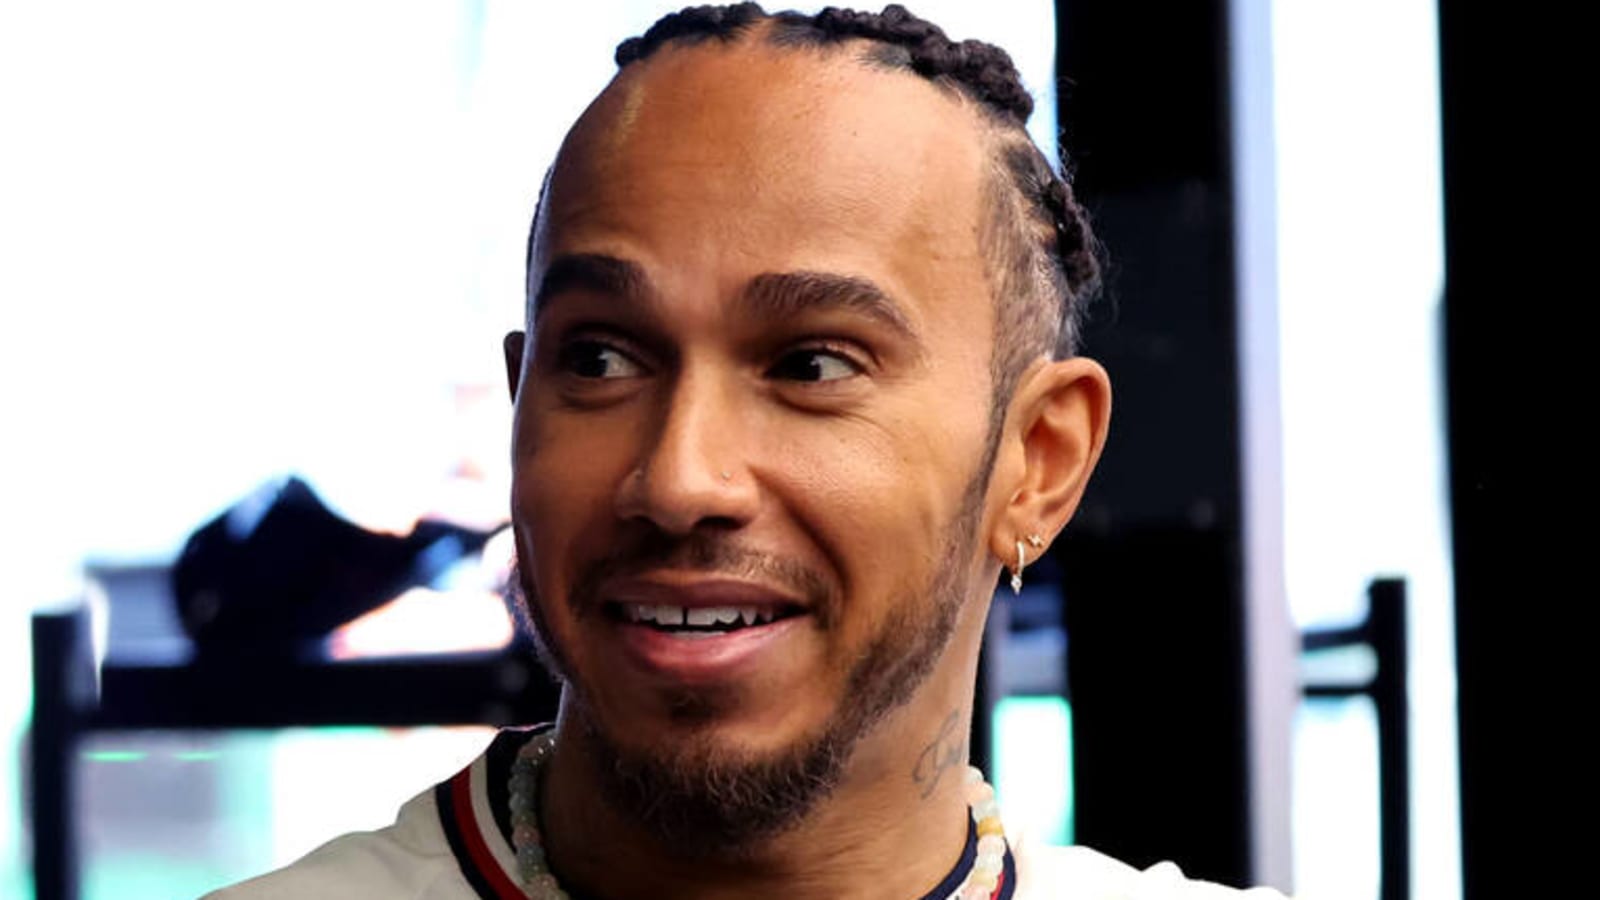 Lewis Hamilton claims he never supported Mohammed Ben Sulayem as FIA Present amidst Susie Wolff saga